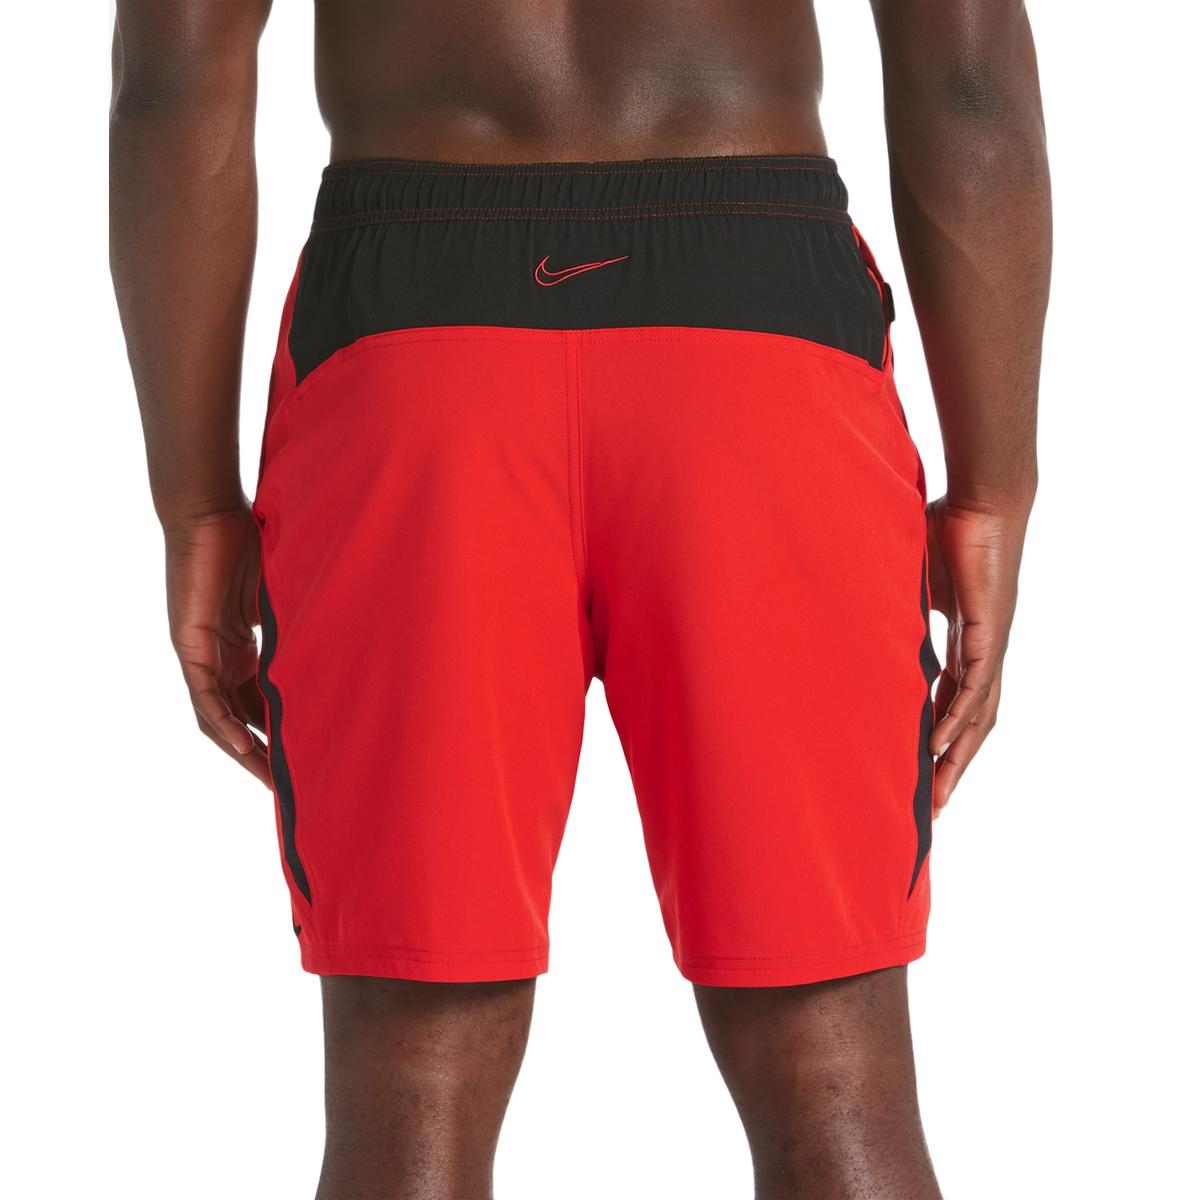  Nike  Mens 9 Volley Red Mesh LIned Beach Trunks Swim  Shorts 